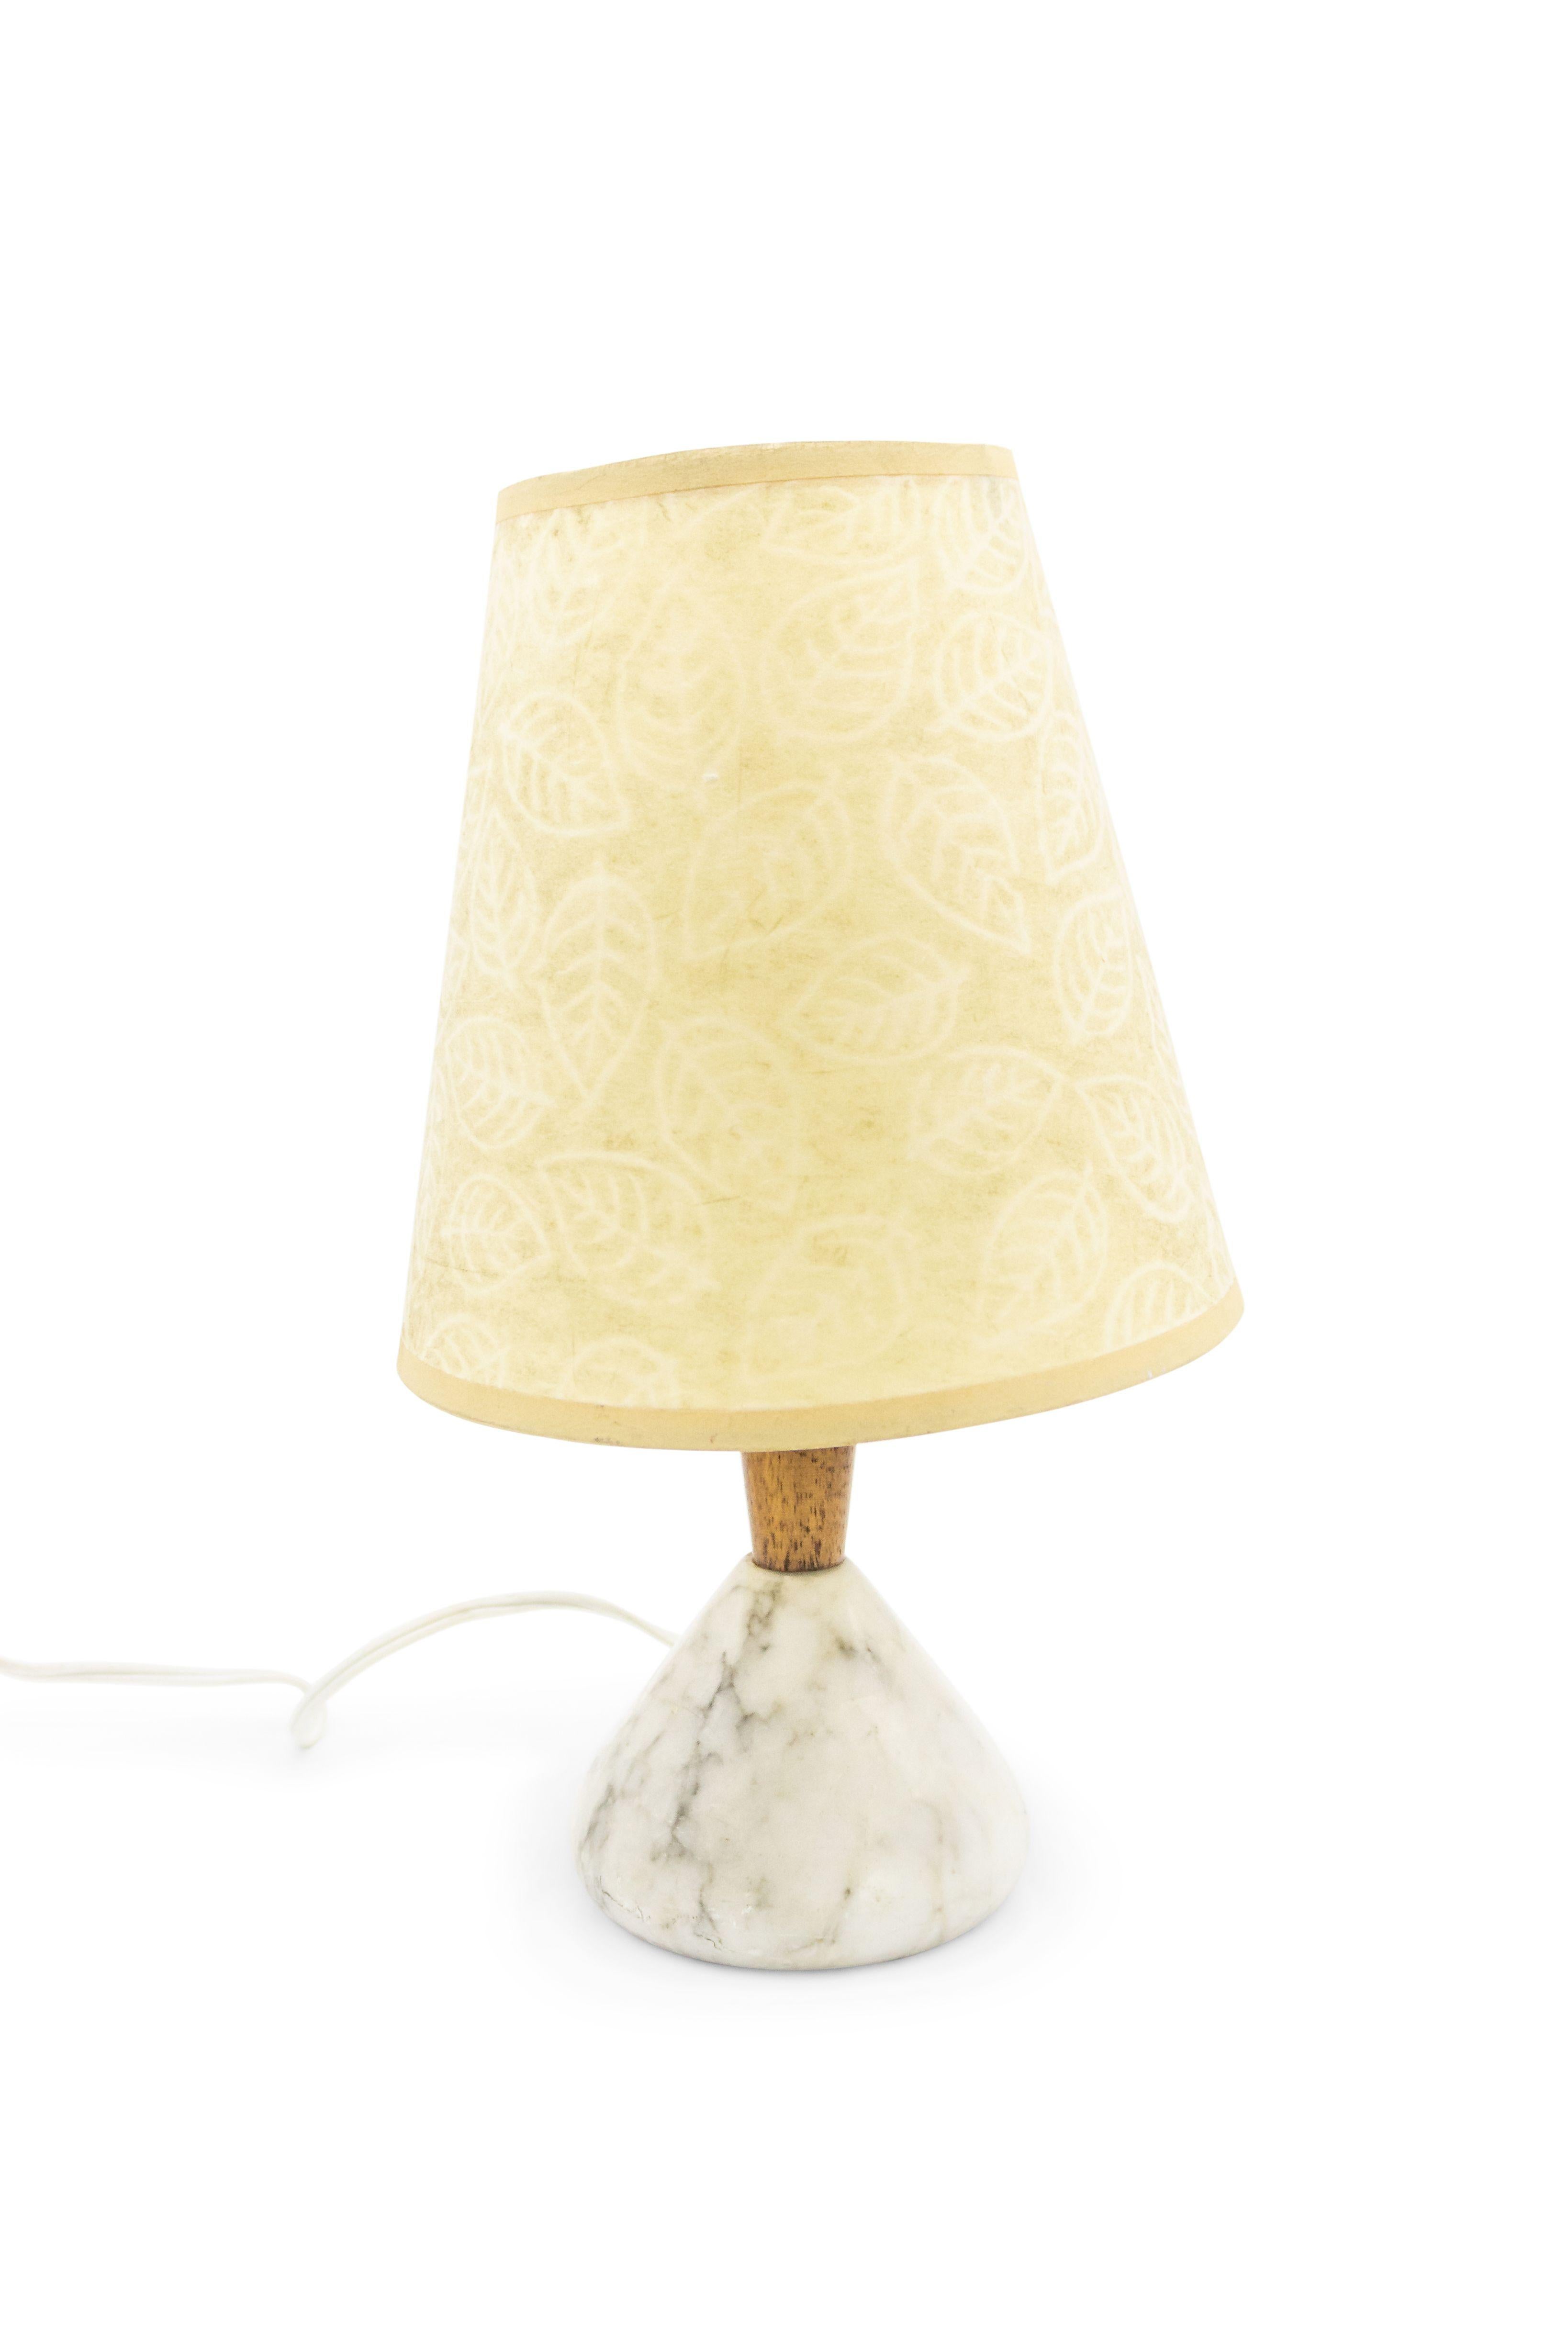 20th Century American Mid-Century Marble and Wood Table Lamp